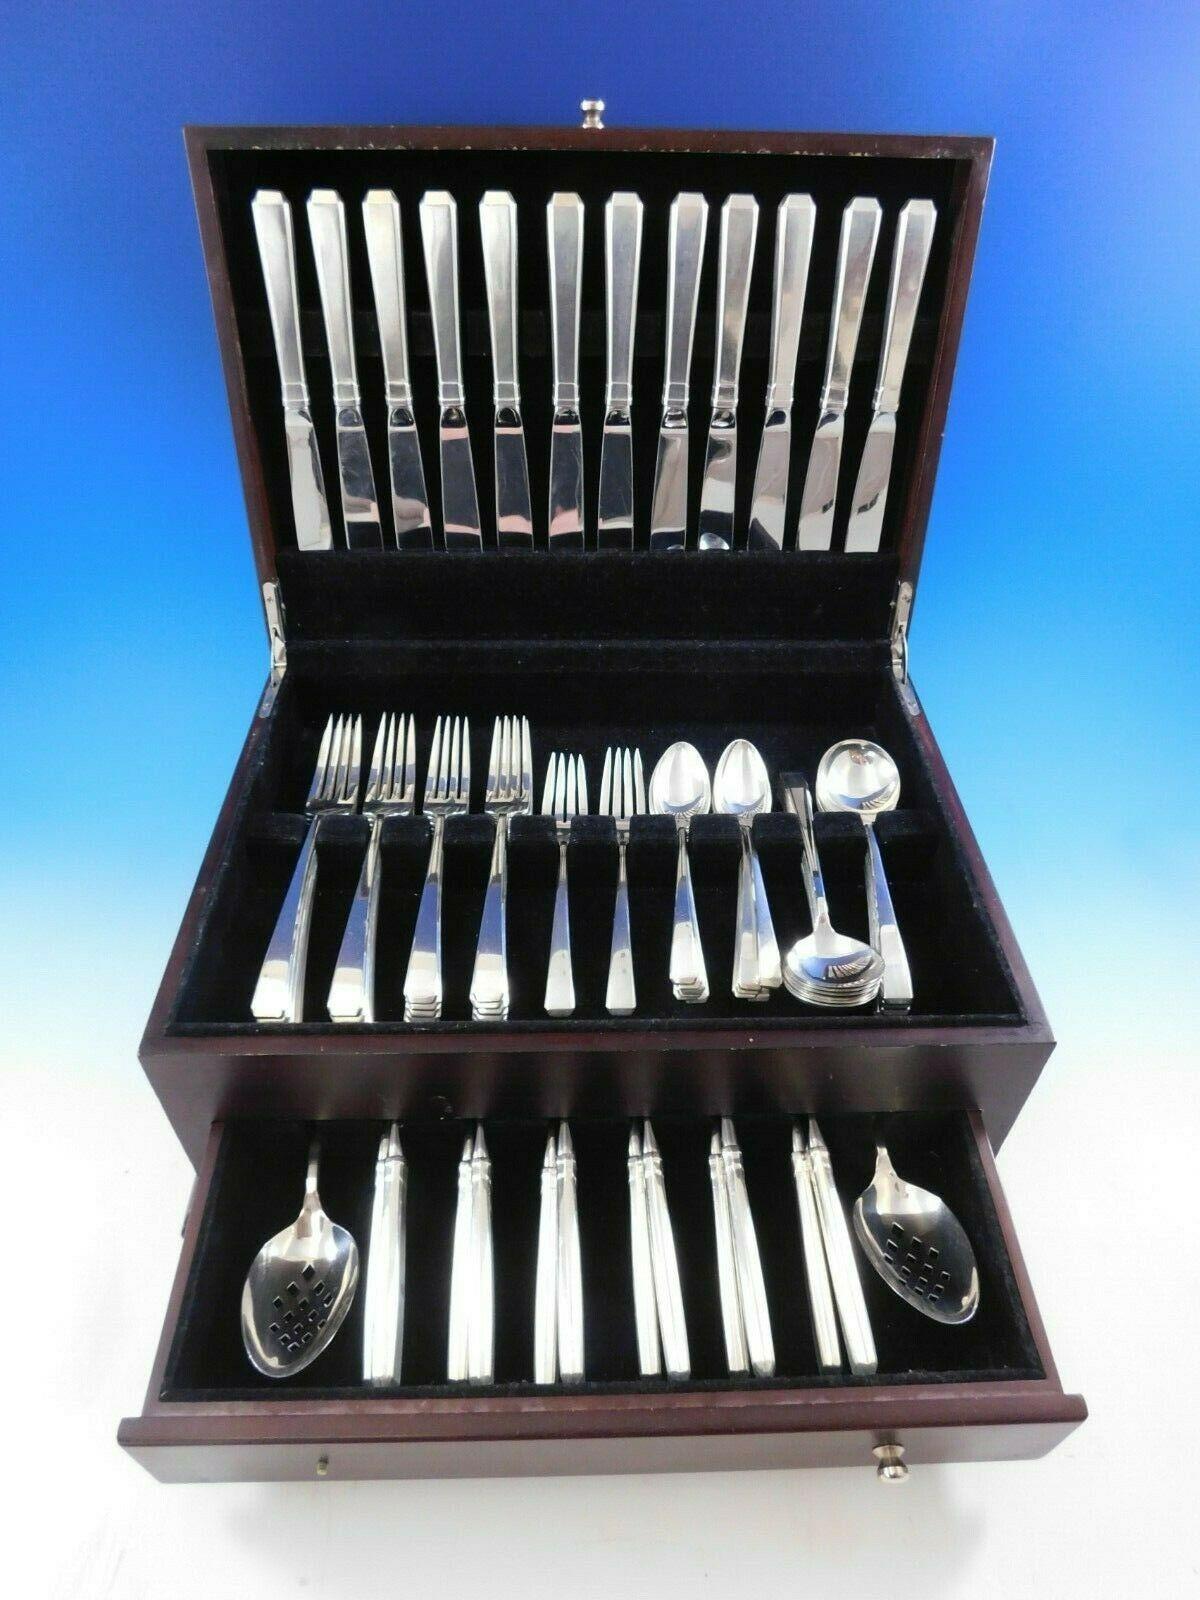 Dinner and luncheon size Craftsman by Towle sterling silver flatware set, 86 pieces. This set includes:

12 dinner size knives, 9 1/2